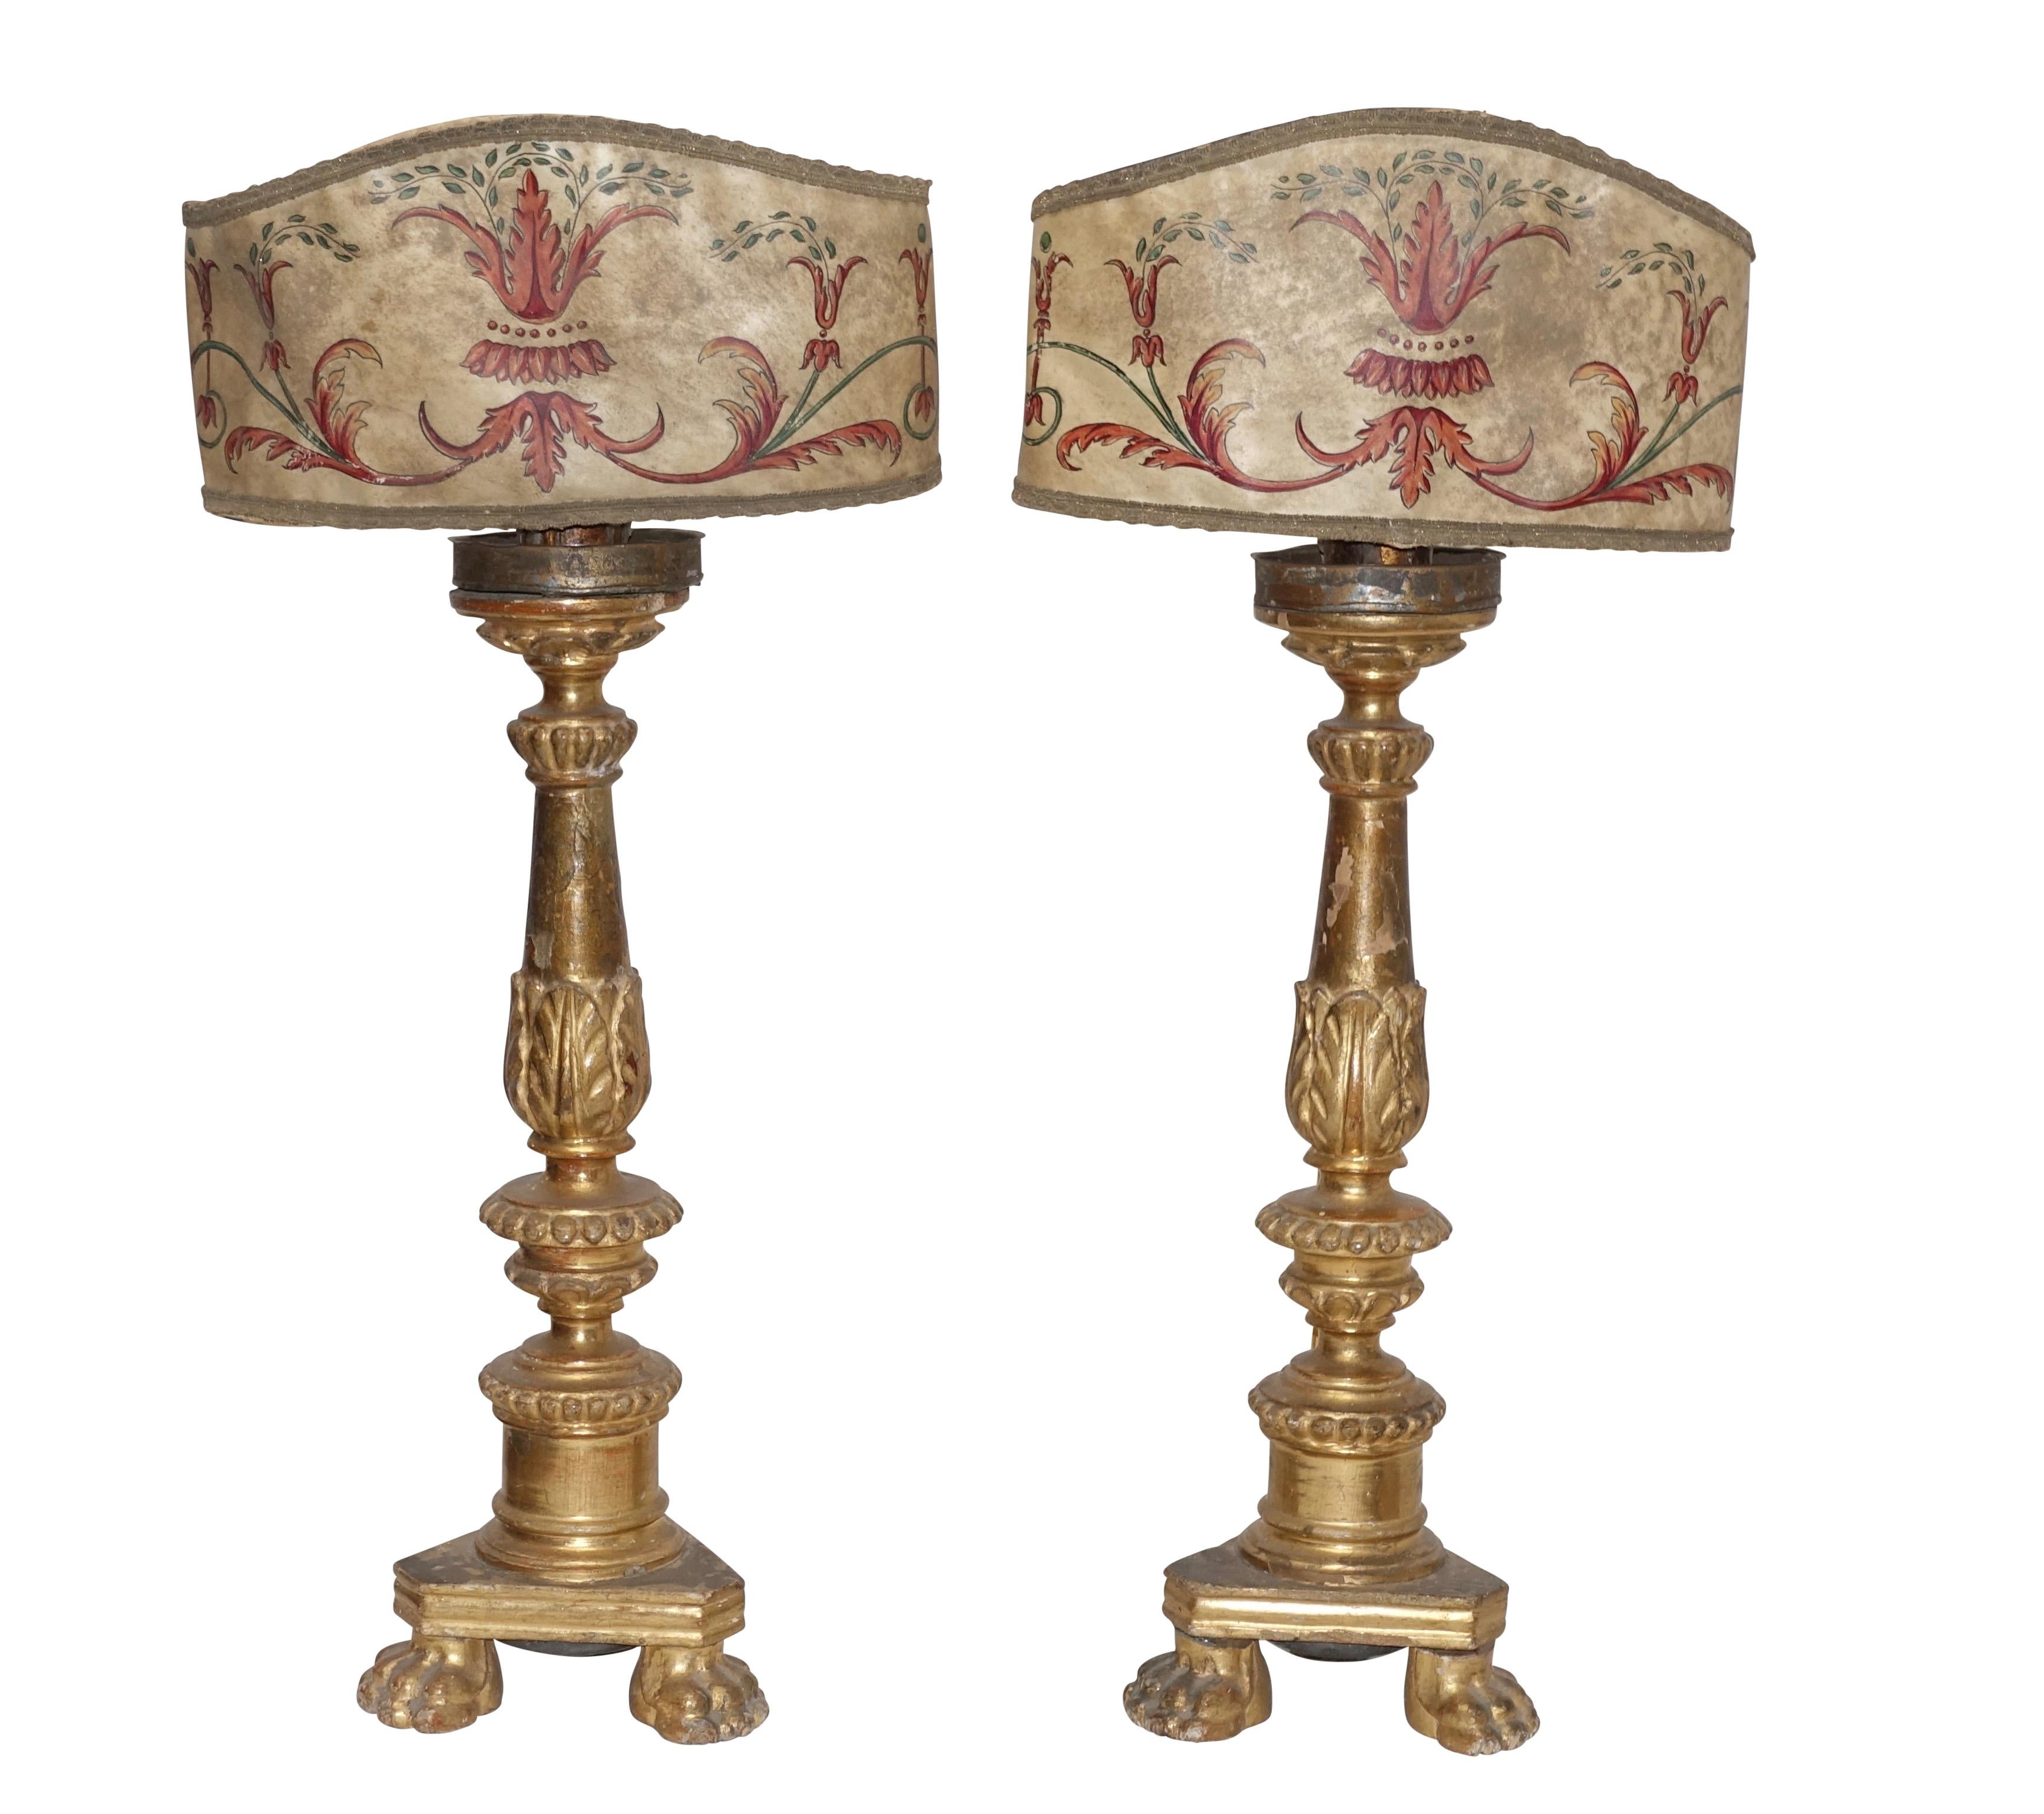 Pair of carved wood and gilt candlesticks now converted to lamps with clip-on hand painted parchment lamp shades, Italian, 18th century.